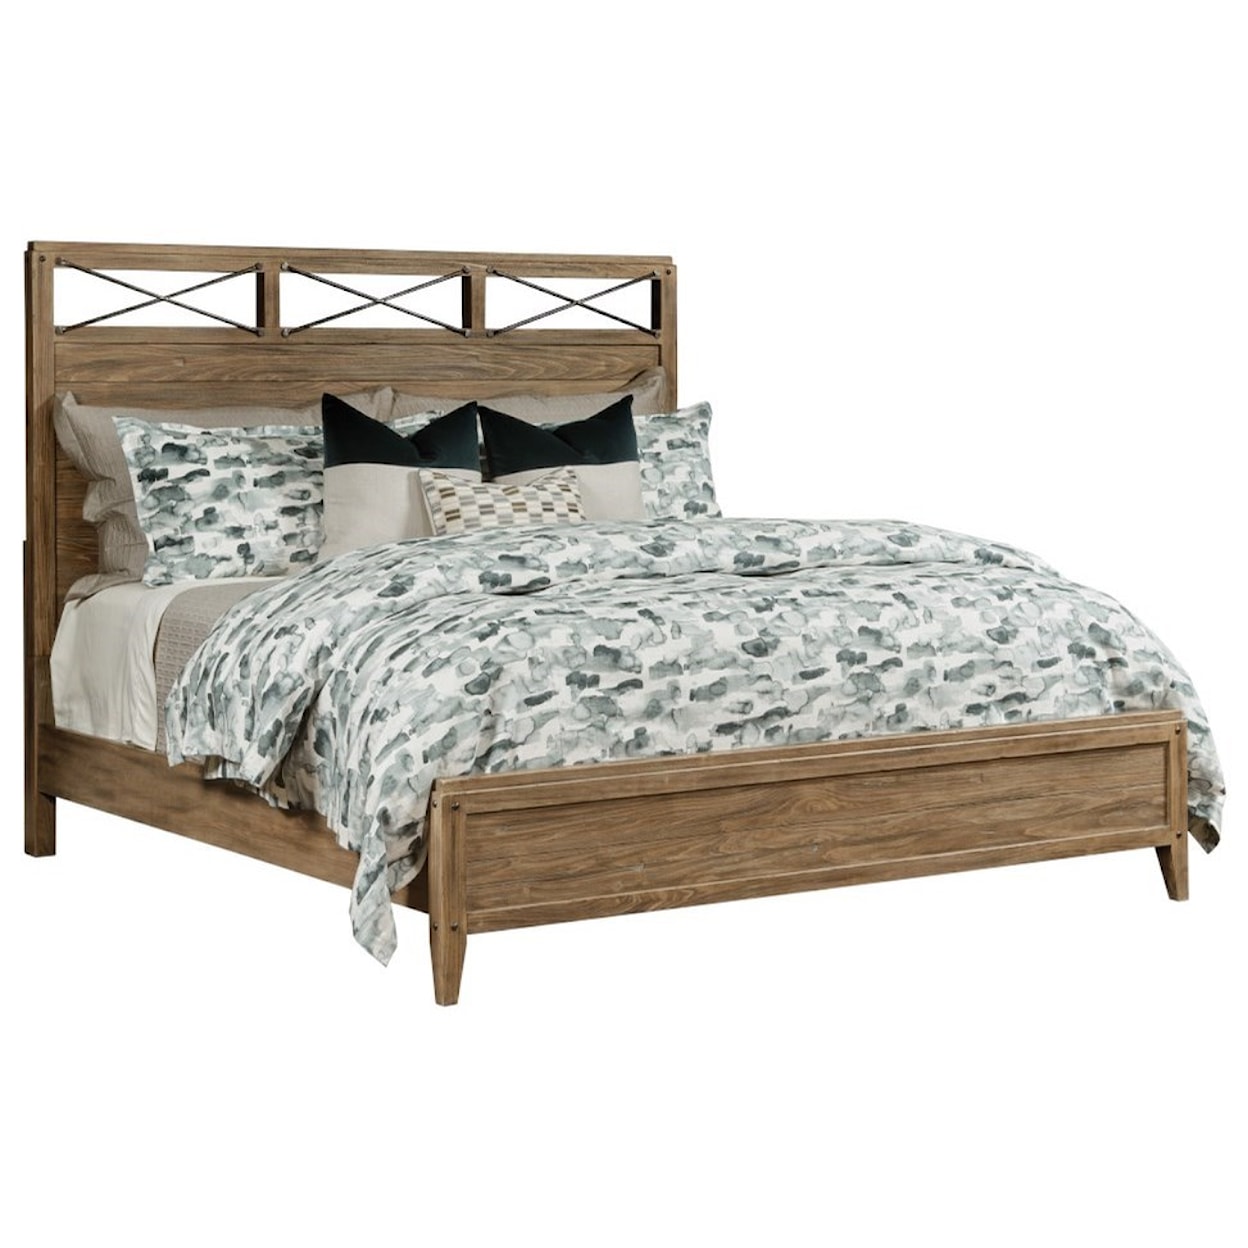 Kincaid Furniture Modern Forge 944 304p Jackson Queen Solid Wood Bed With Metal Detail Belfort 